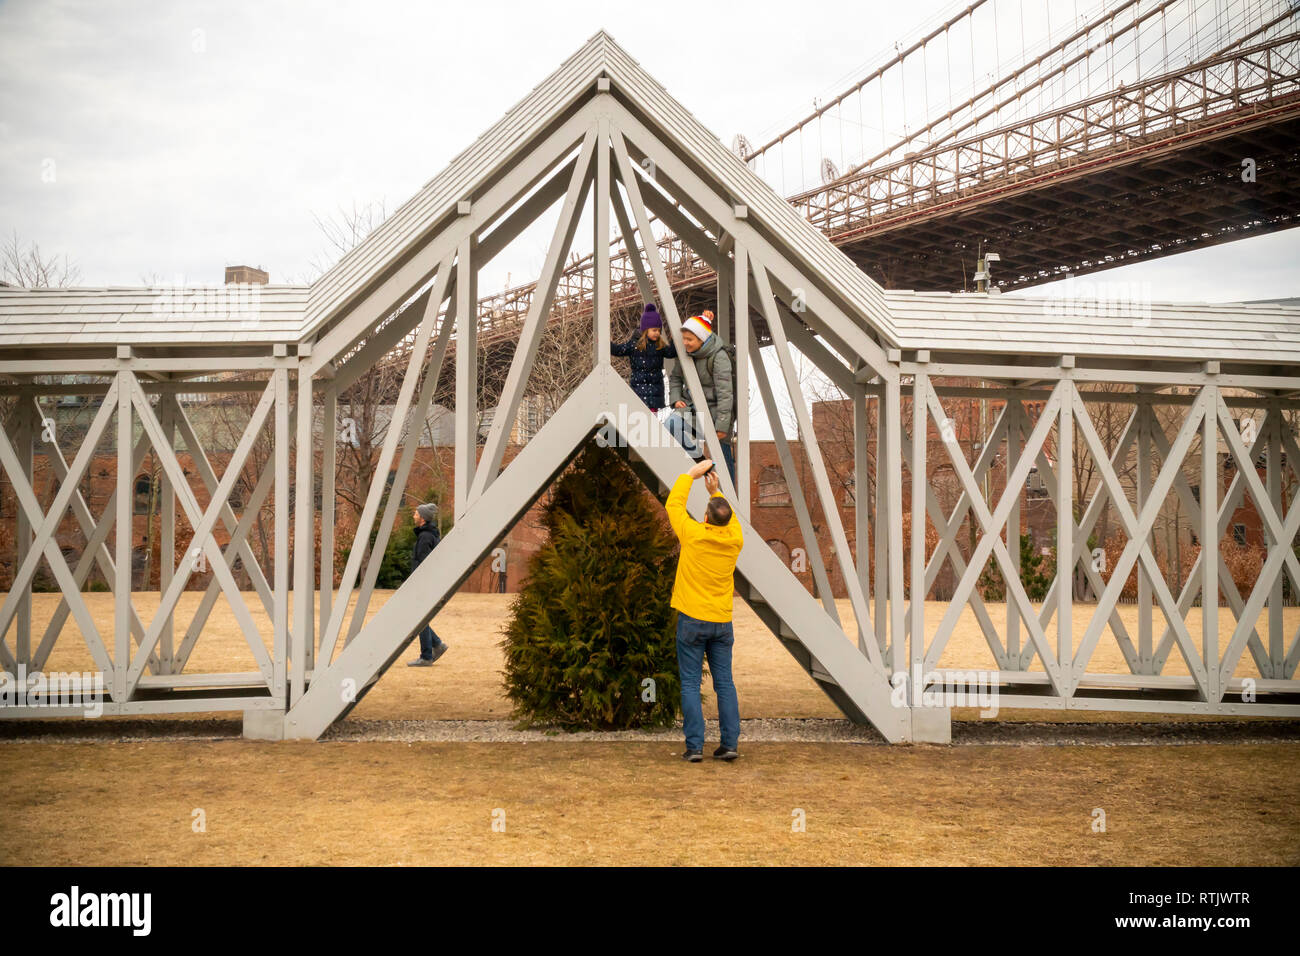 Siah Armajani's experiential public art sculpture, 'Bridge Over Tree' is enjoyed by visitors to Brooklyn Bridge Park, between the Manhattan and Brooklyn bridges, in New York on Saturday, February 23, 2019. The 91-foot long piece with stairs in the center lifts the participant over a lone evergreen tree  and it is the first time the 1970 piece has been displayed in almost 50 years. The Met Breuer is hosting a retrospective of the Minneapolis based artists' works and 'Bridge Over Tree' will be on display in the park until September 29. (Â© Richard B. Levine) Stock Photo